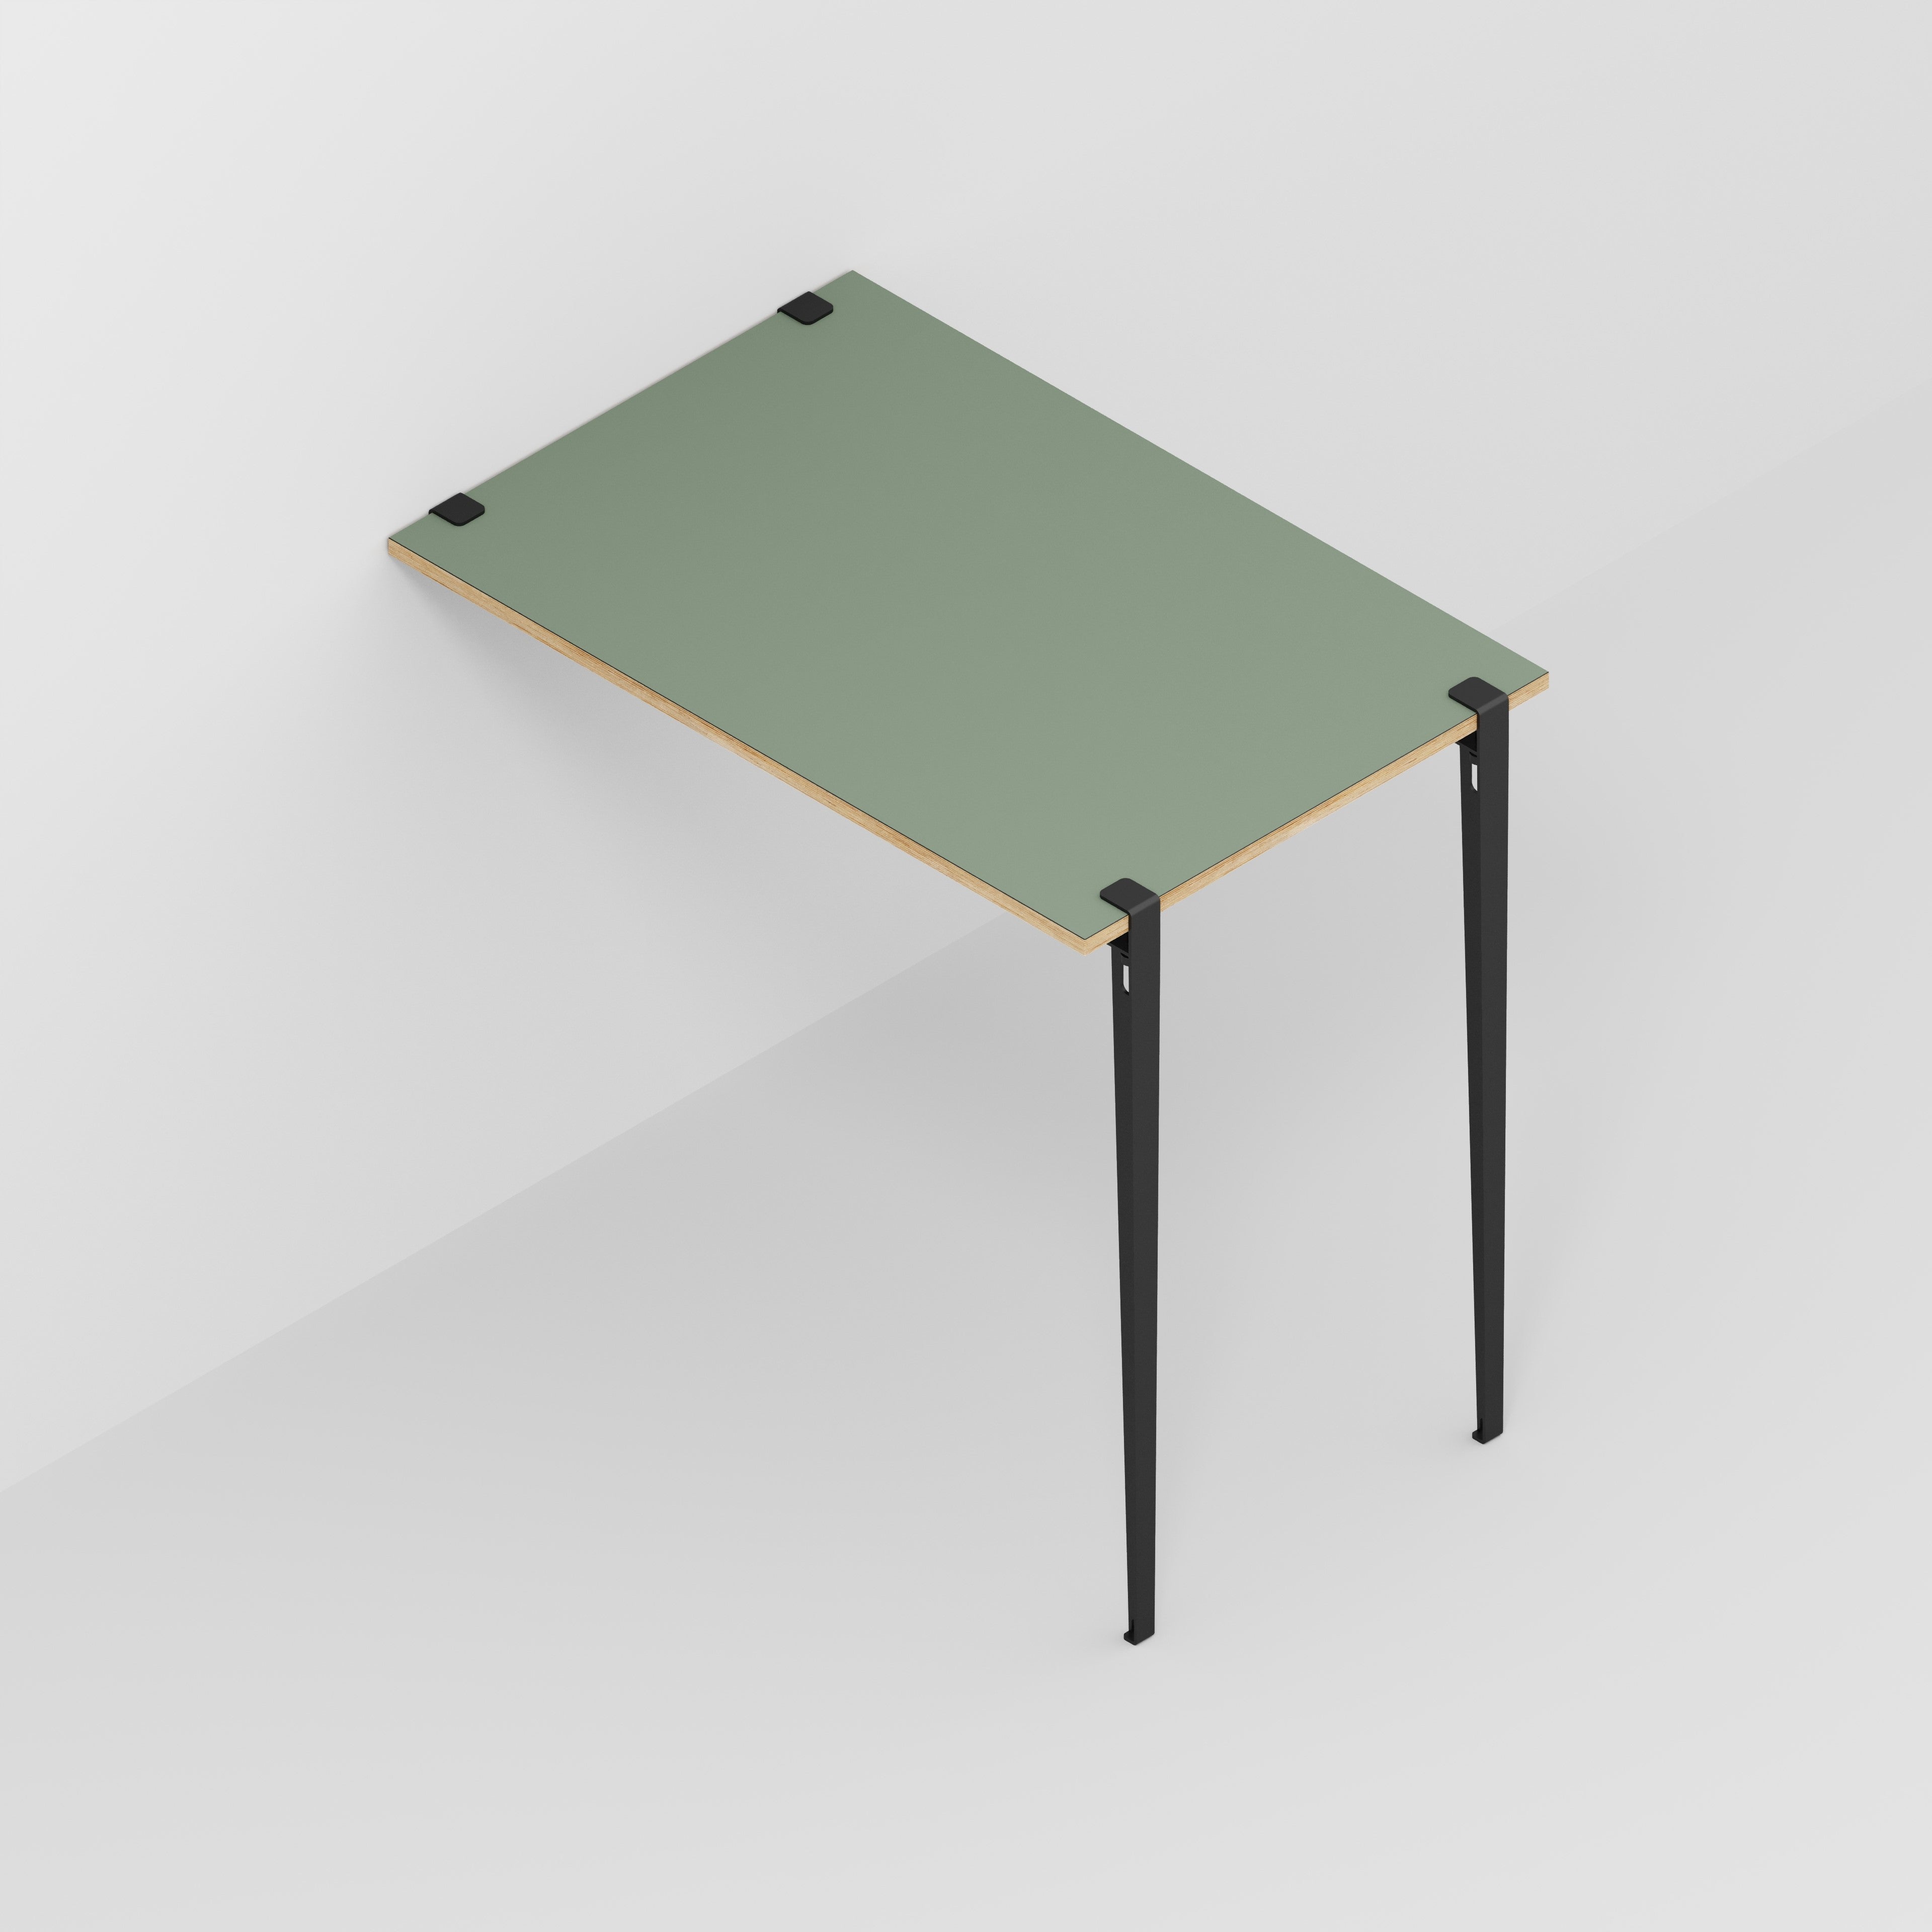 Wall Table with Black Tiptoe Legs and Brackets - Formica Green Slate - 1200(w) x 800(d) x 1100(h)